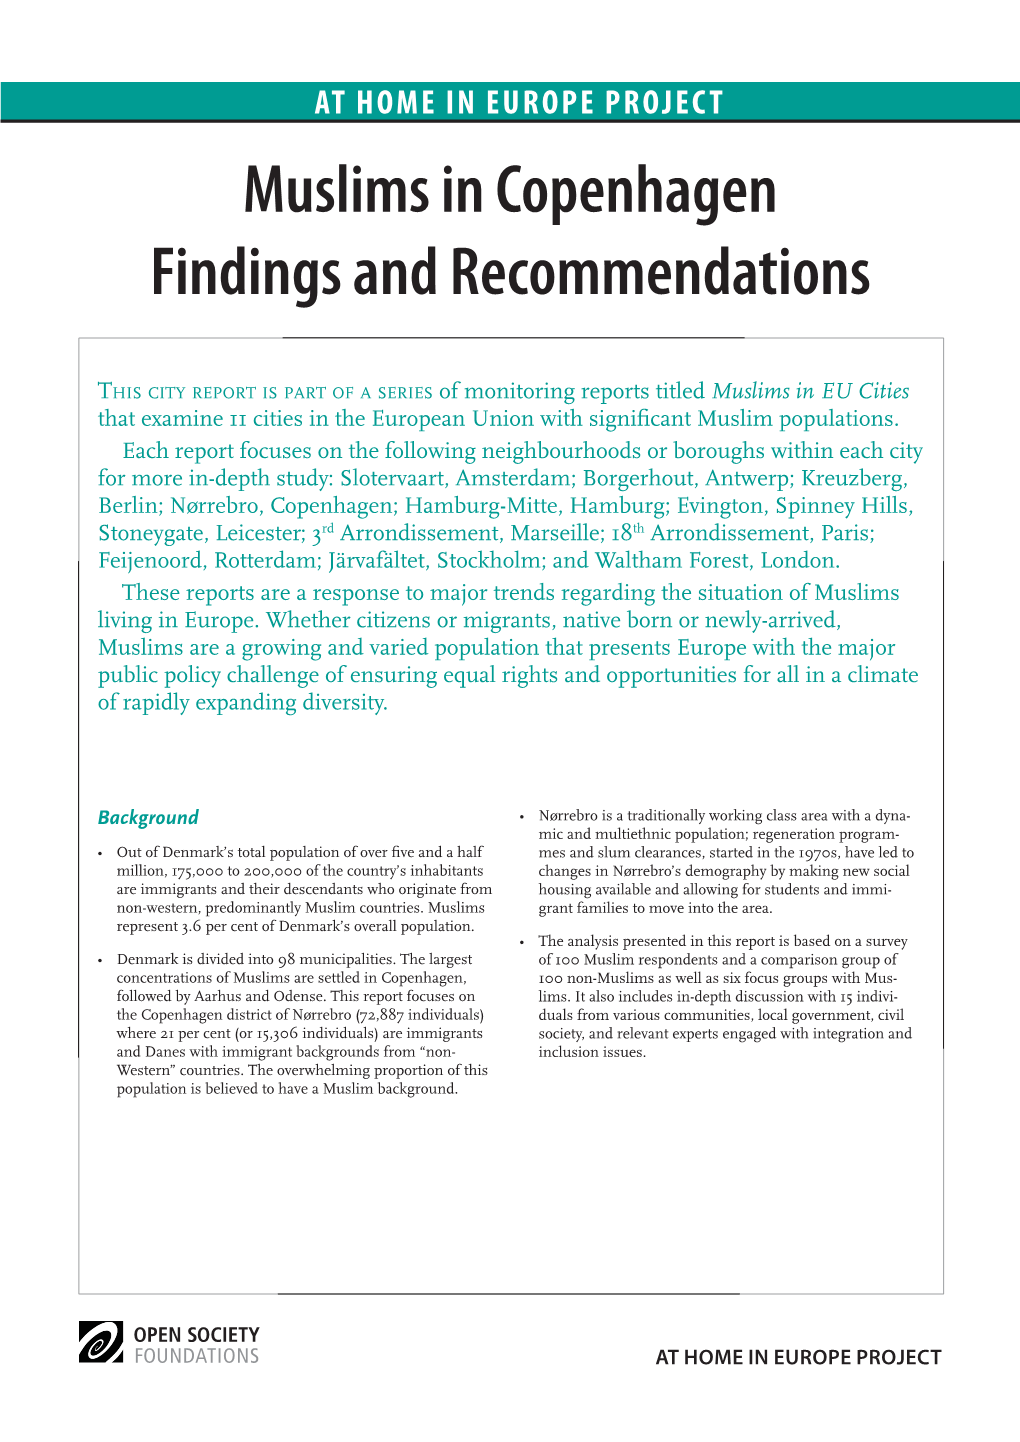 Muslims in Copenhagen Findings and Recommendations